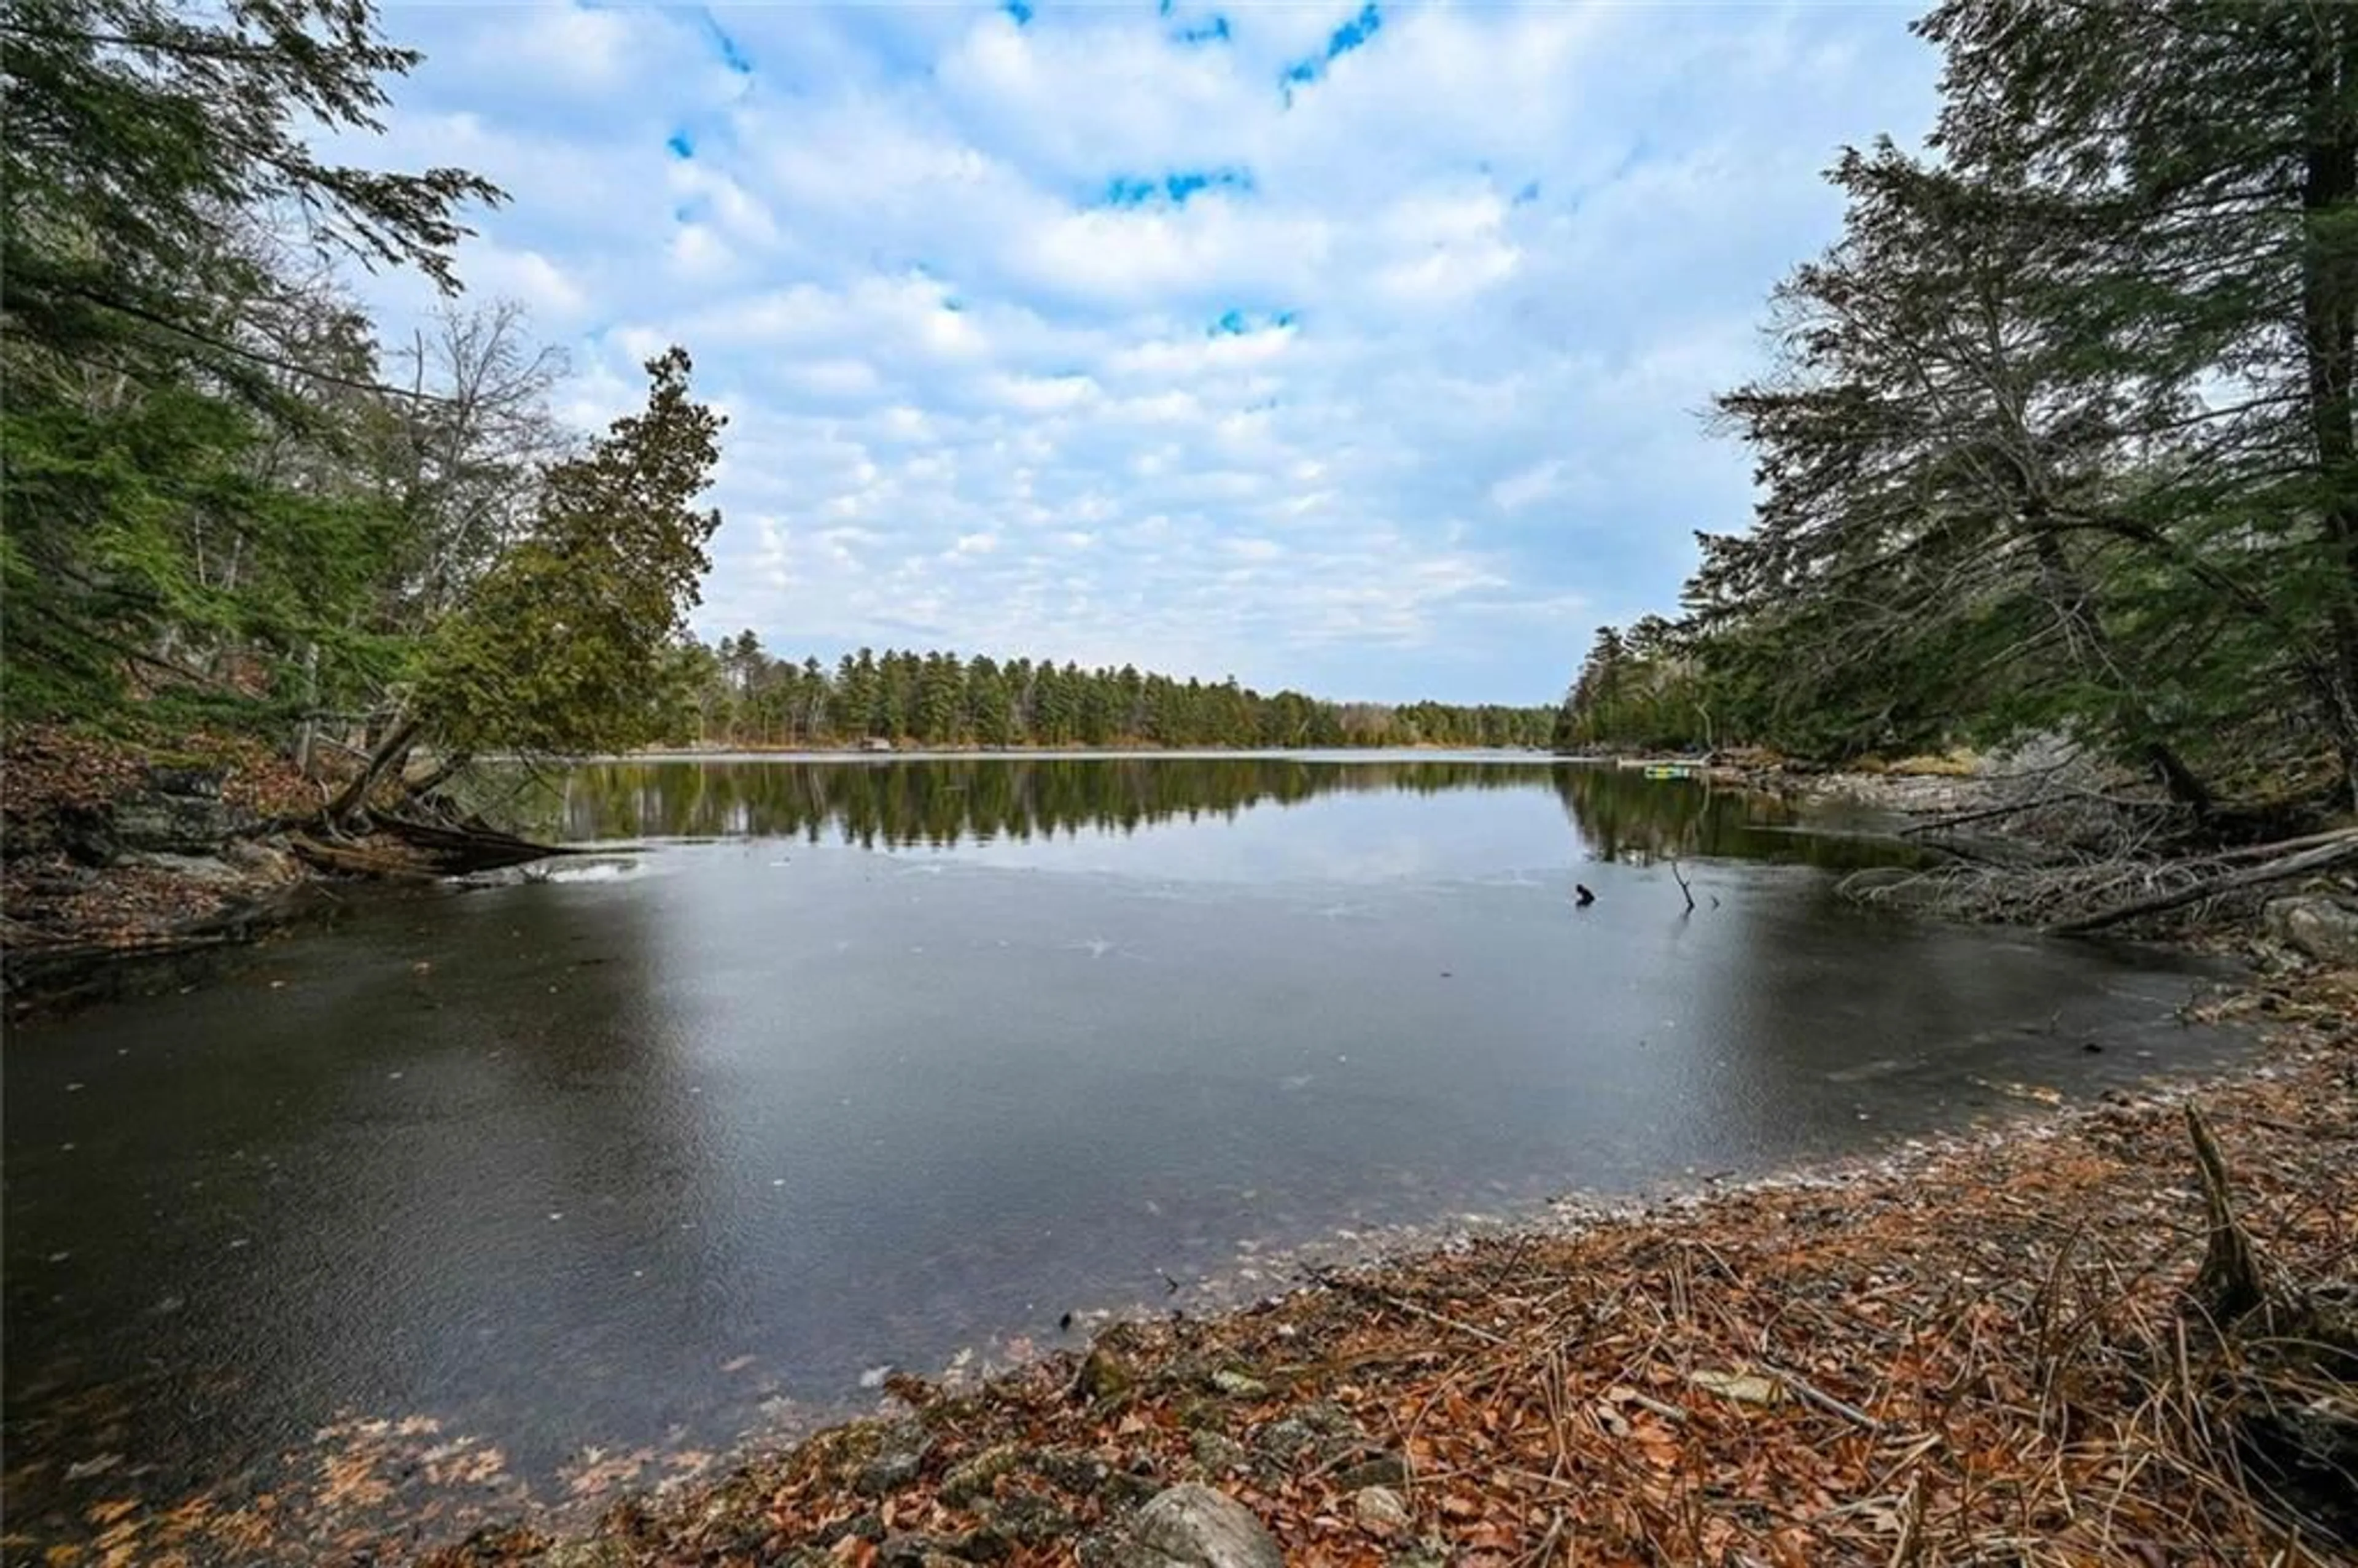 Lakeview for 436 MINER'S POINT Rd, Perth Ontario K7H 3C5